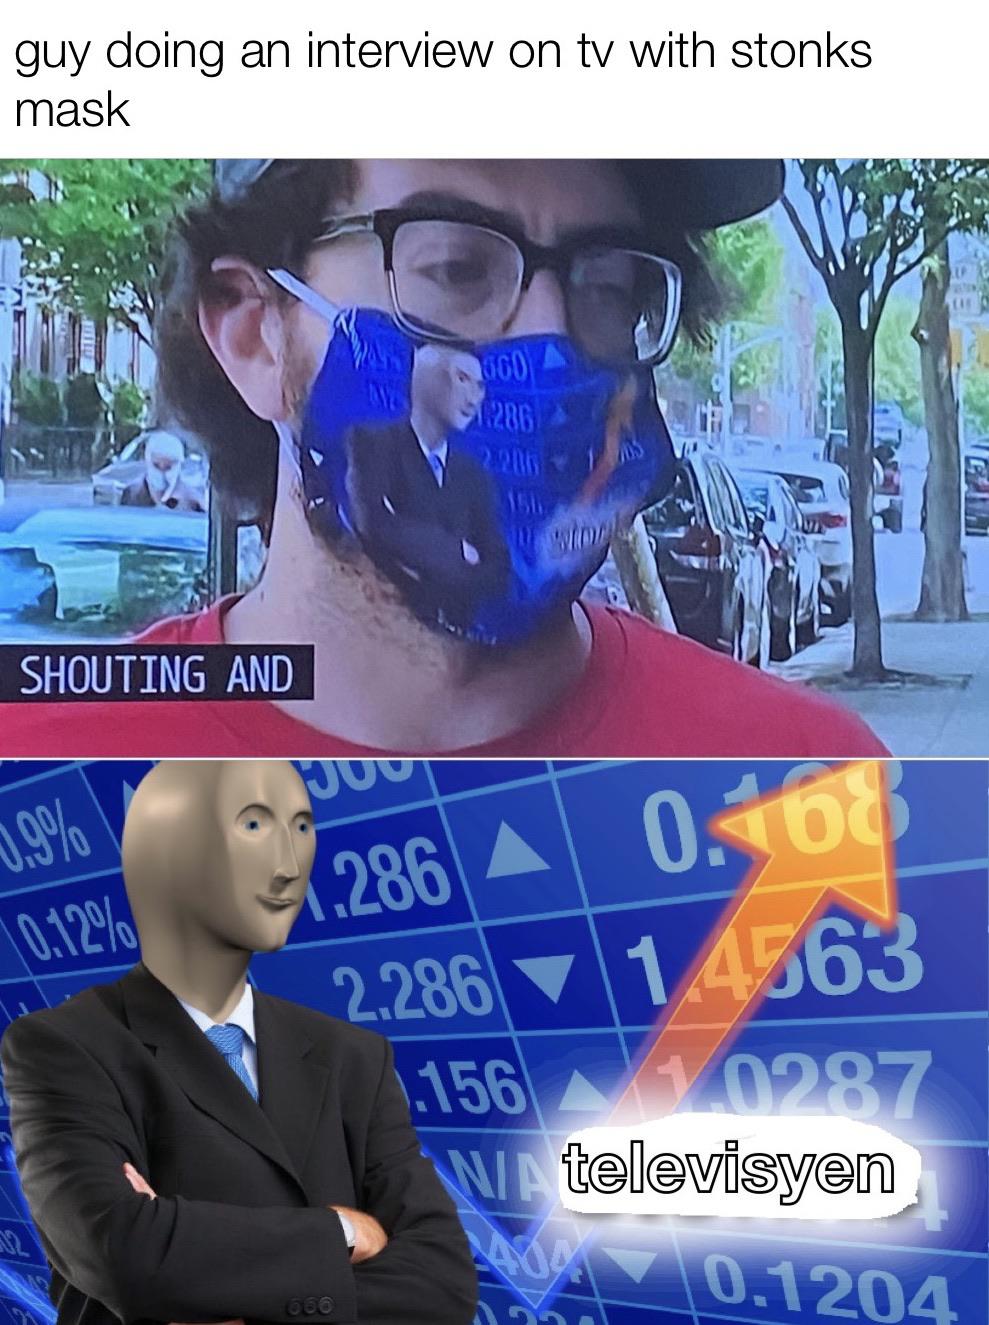 Funny, Malay, Television, Stonks, NVEST other memes Funny, Malay, Television, Stonks, NVEST text: guy doing an interview on tv with stonks mask SHOUTING AND \.156 tenevåsyen 